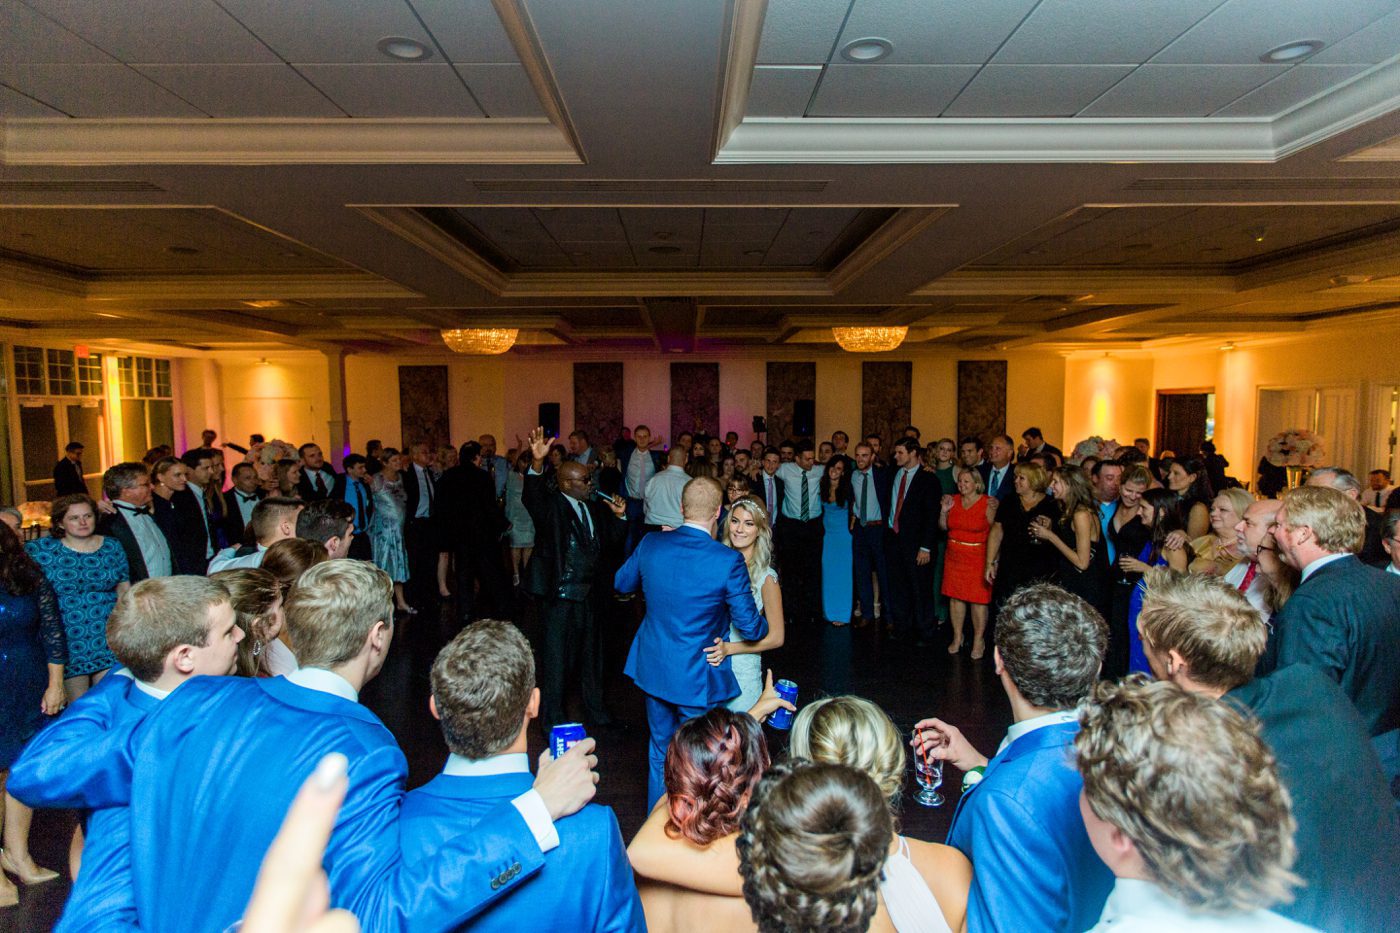 Photo of all guests surrounding bride and groom on the dance floor